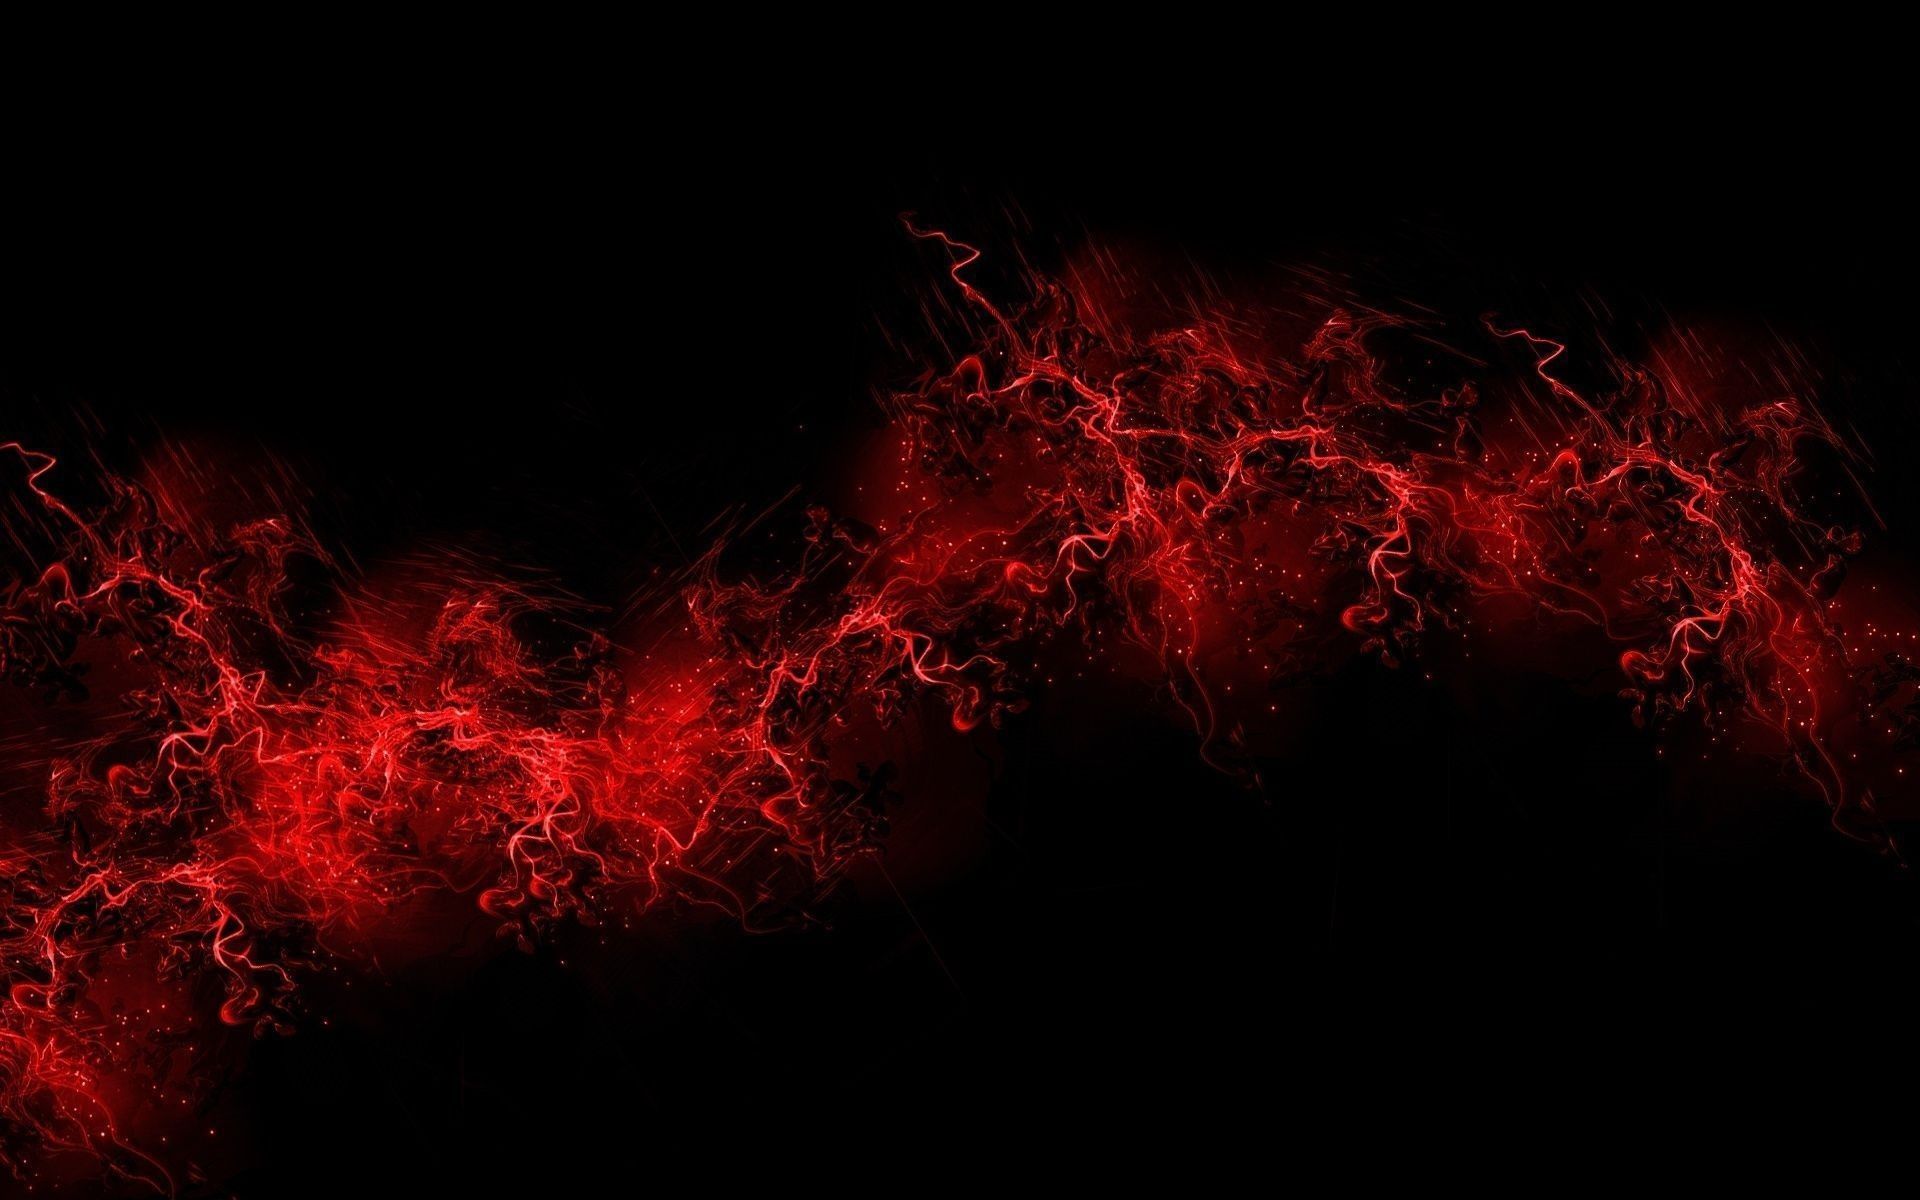 Cool Red Lightning Wallpapers